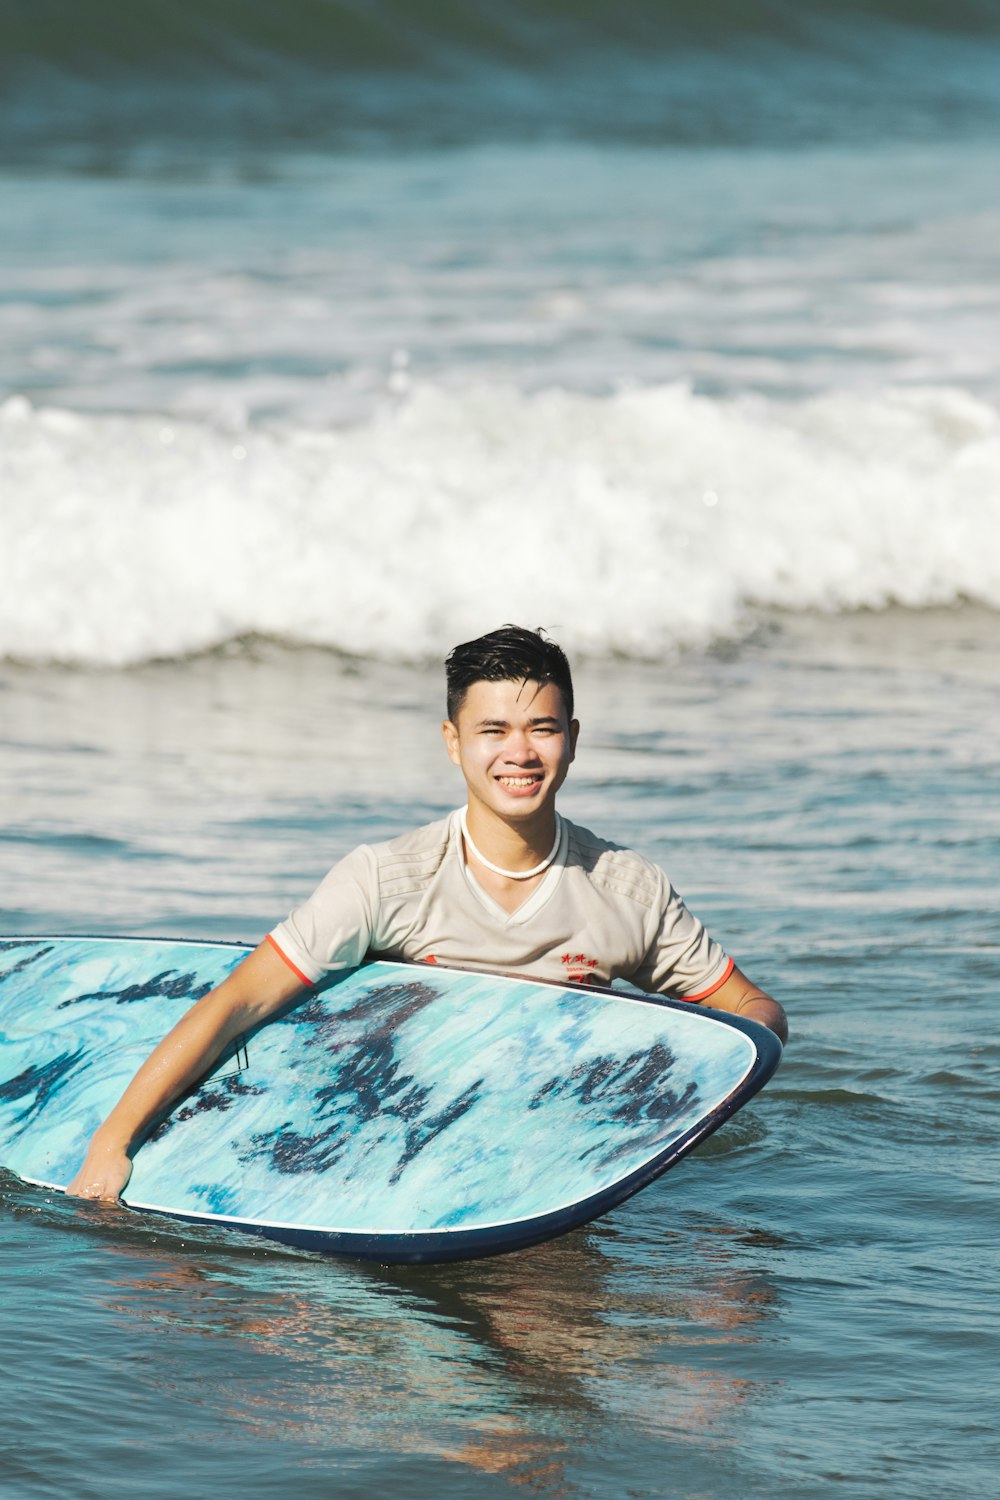 a man smiles while holding a surfboard in the ocean